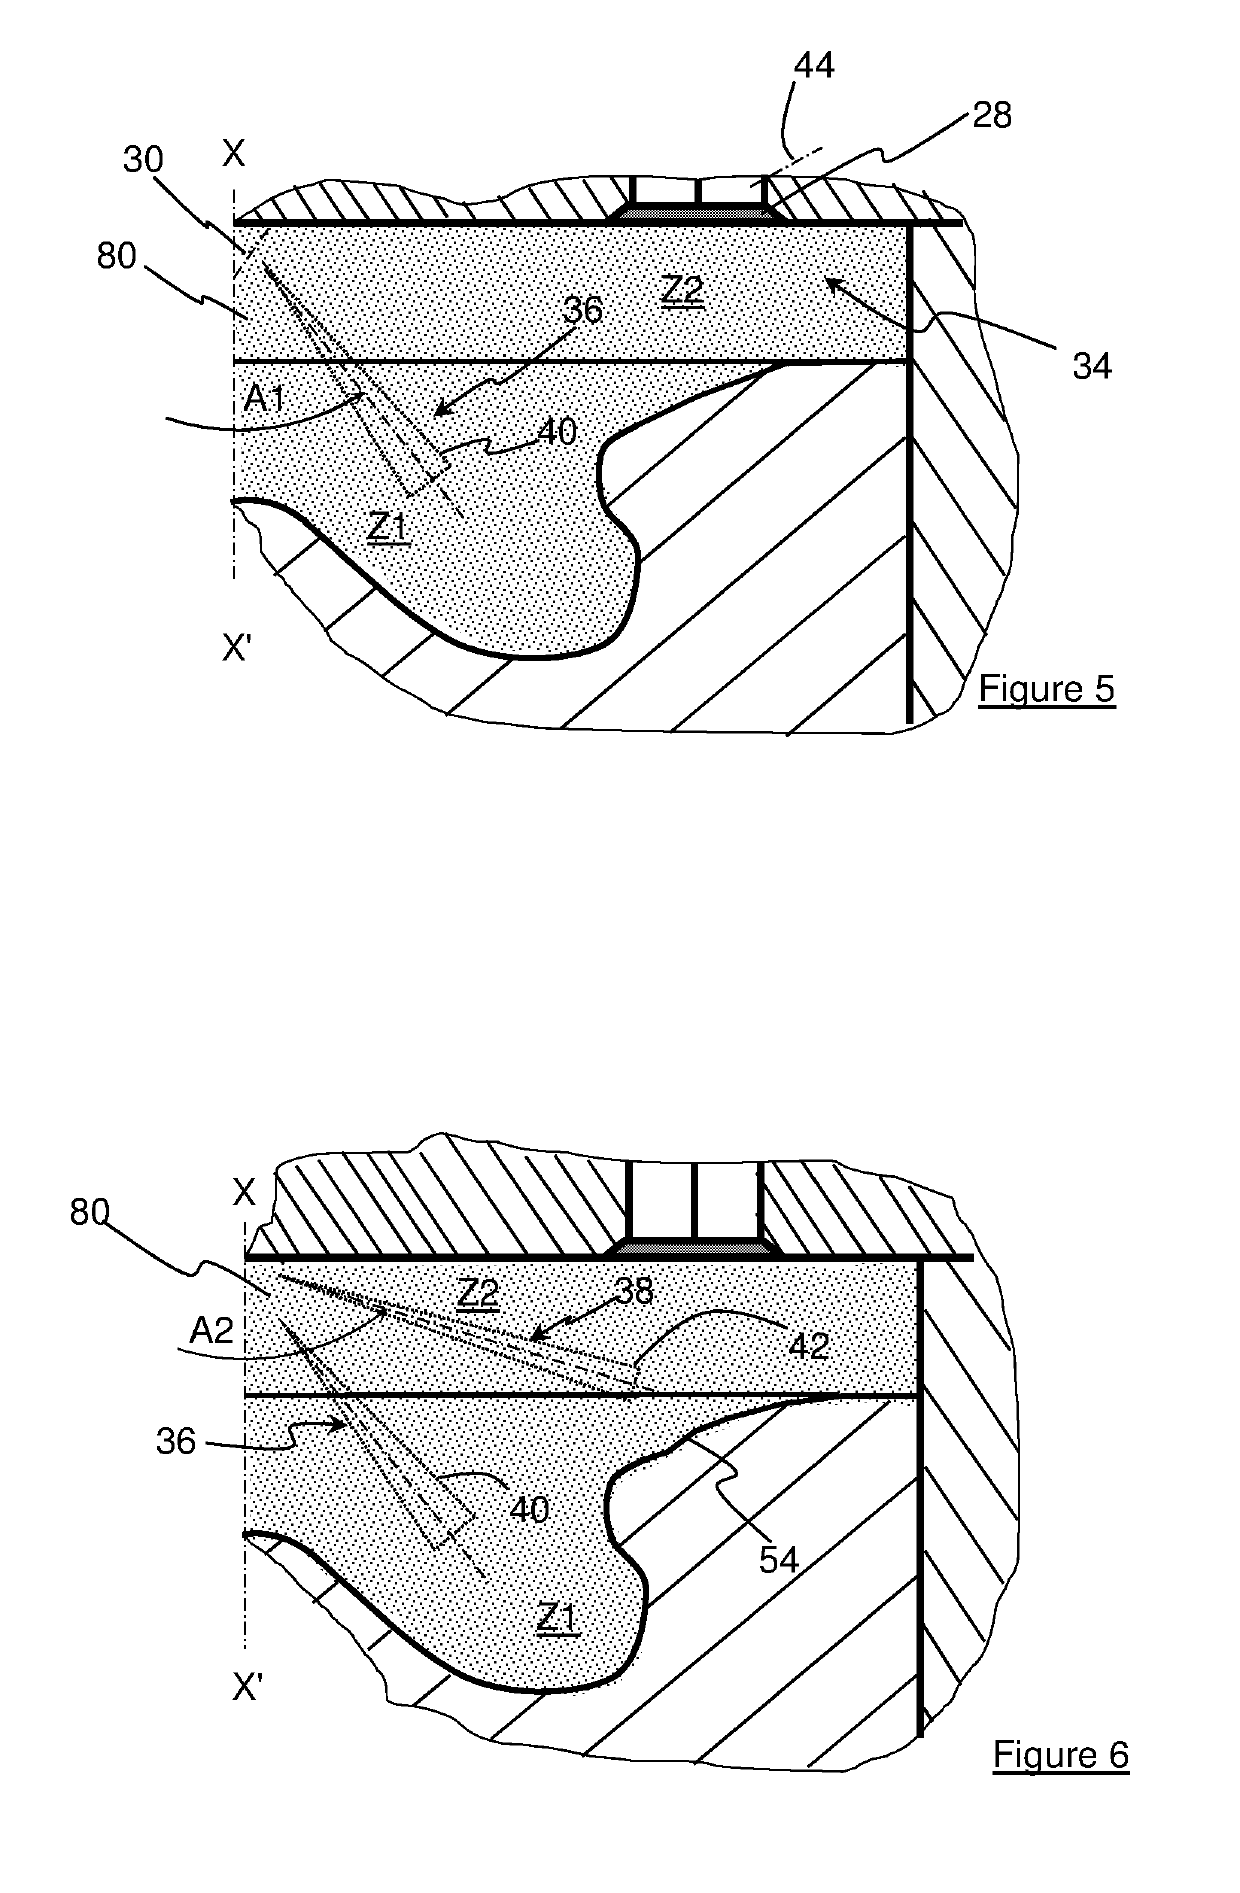 Method of injecting fuel into the combustion chamber of an internal-combustion engine running in single-fuel or multi-fuel mode